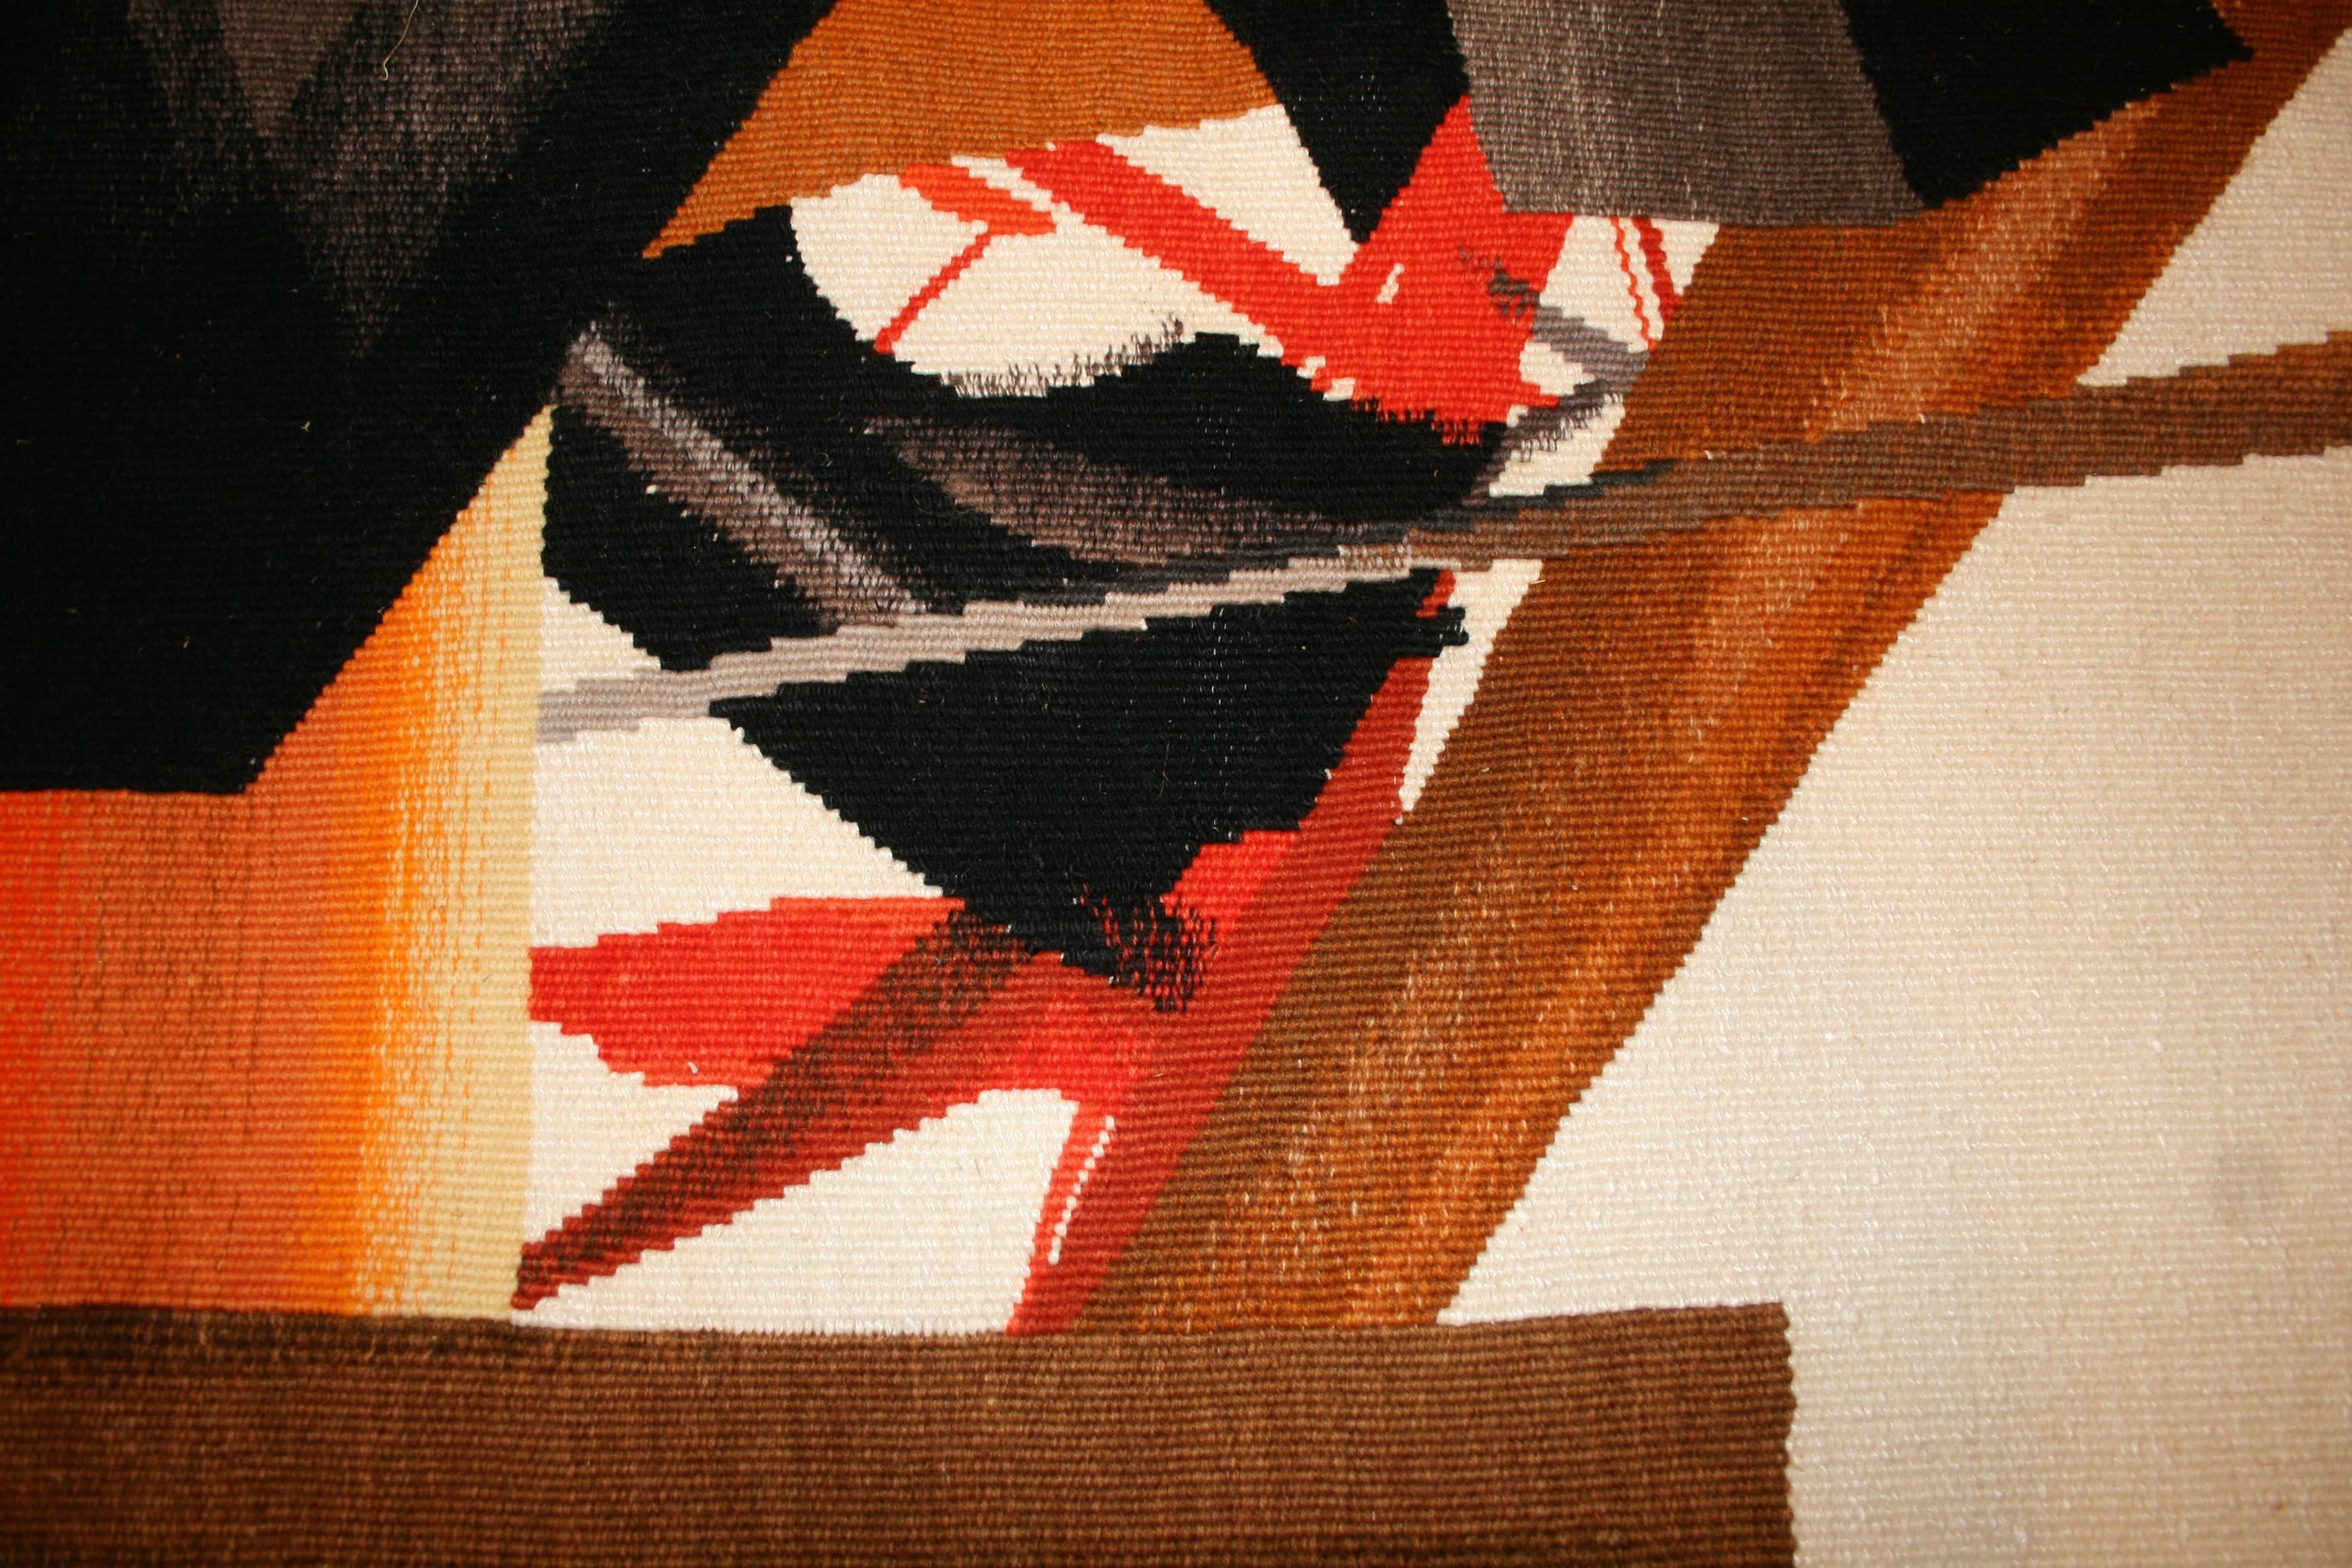 Wool 20th Century French Modernist Aubusson Tapestry by Jean-René Sautour-Gaillard For Sale